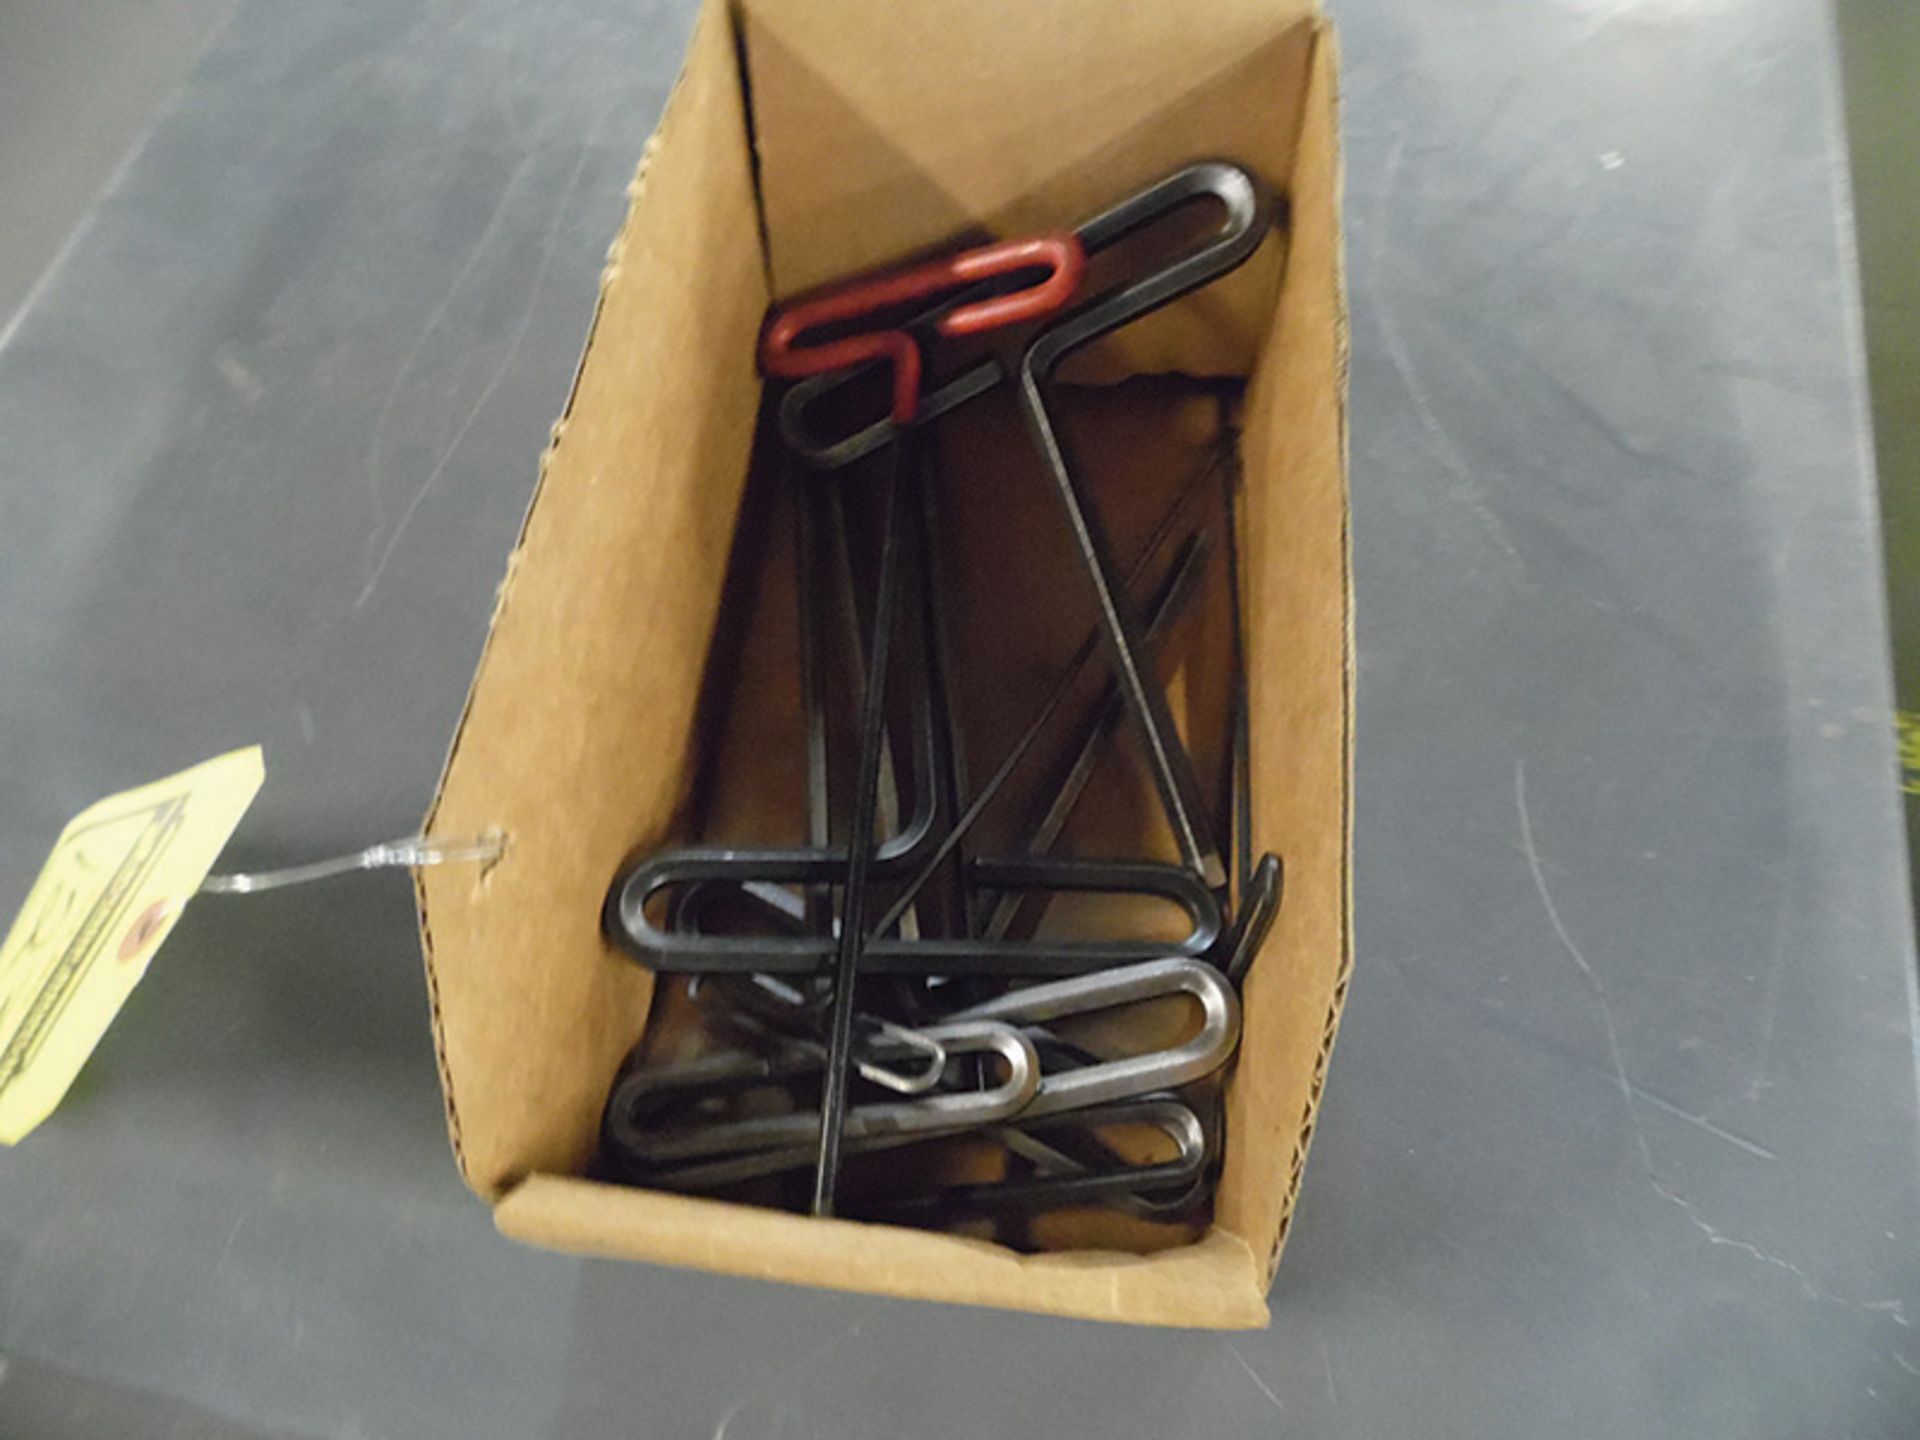 T-HANDLE ALLEN WRENCHES